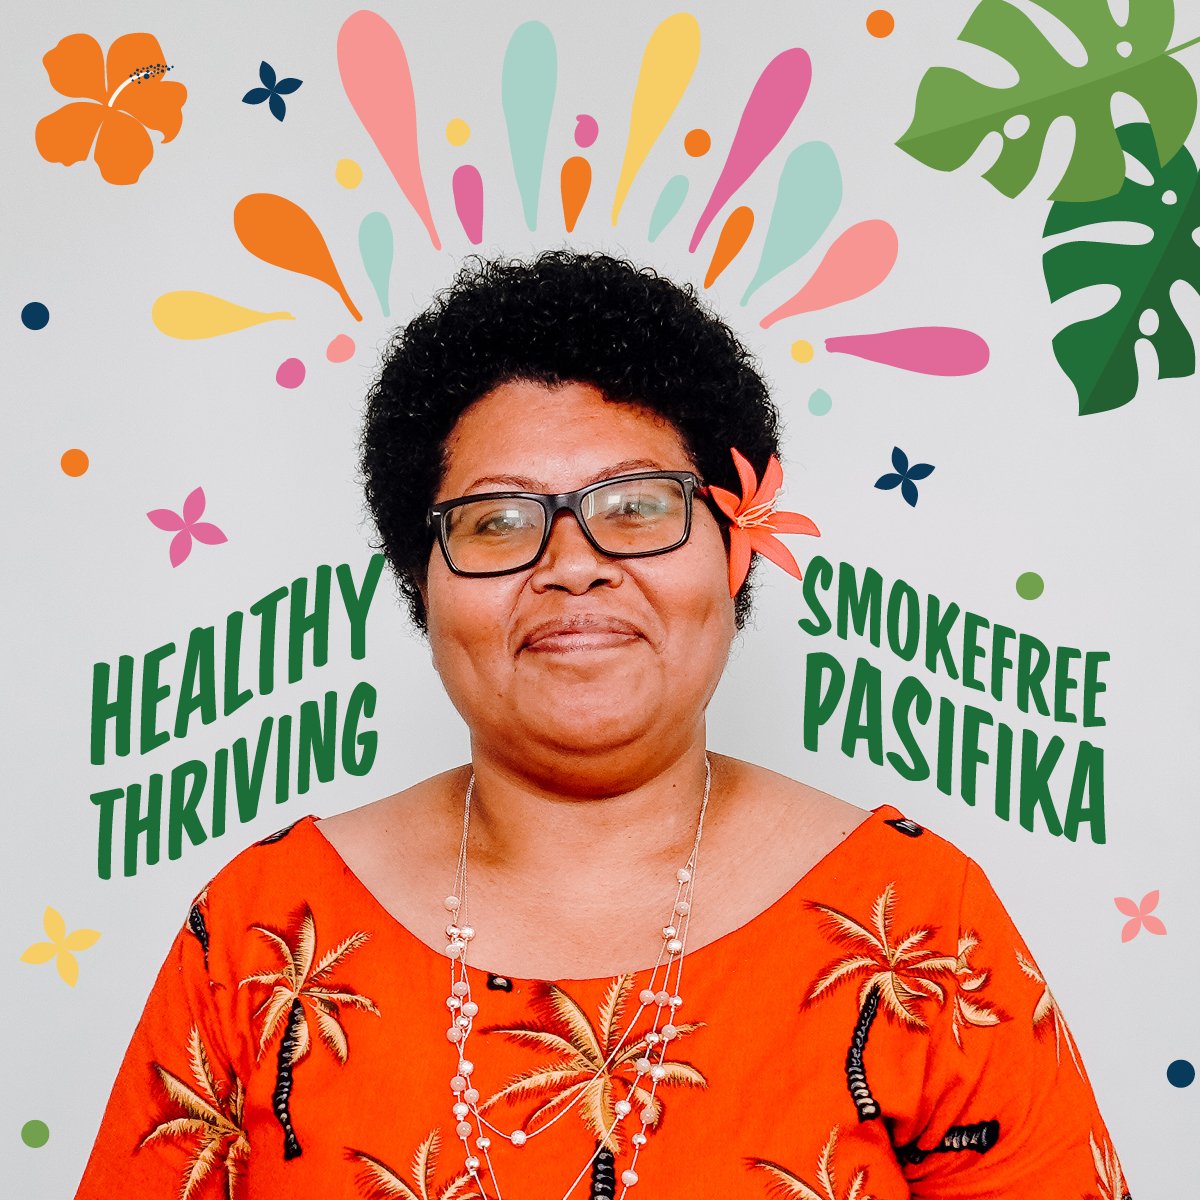 Yadra vinaka Tangata Atumotu family! 

It is the first day of the month &amp; the beginning of #SmokefreeMay2024 👊🏾

Make May your month to stop smoking and rally your vuvale and community members to advocate for a Smokefree Aotearoa, ensuring bett